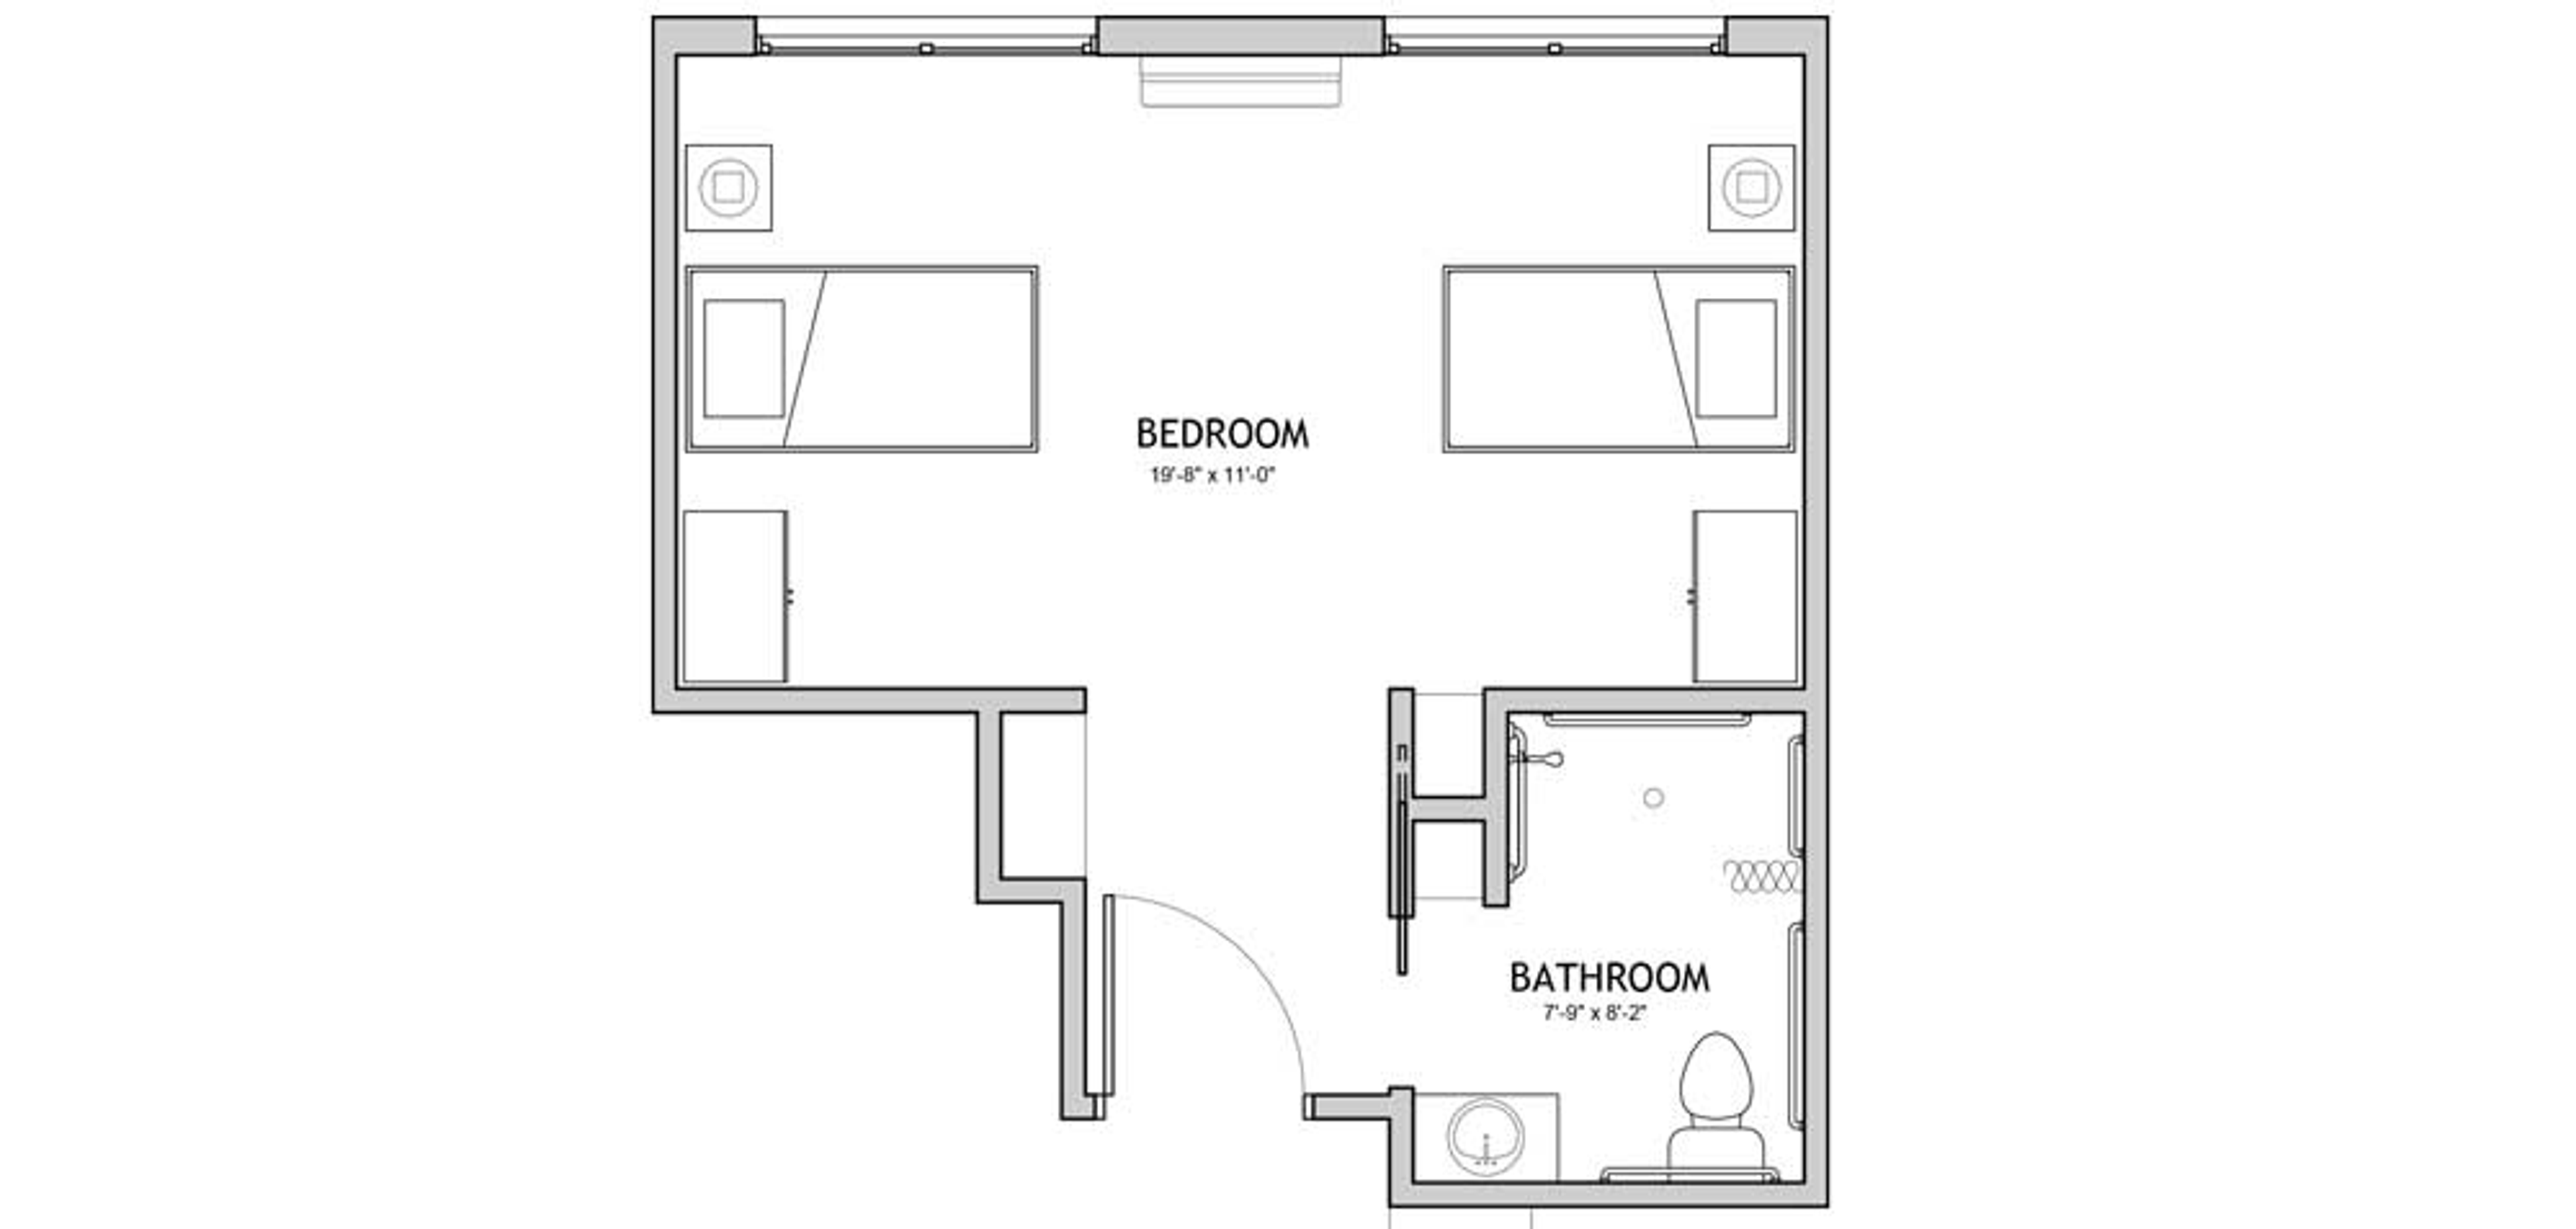 Floorplan - The Auberge at Naperville - 1 bed, 1 bath, 354 sq. ft. Memory Care